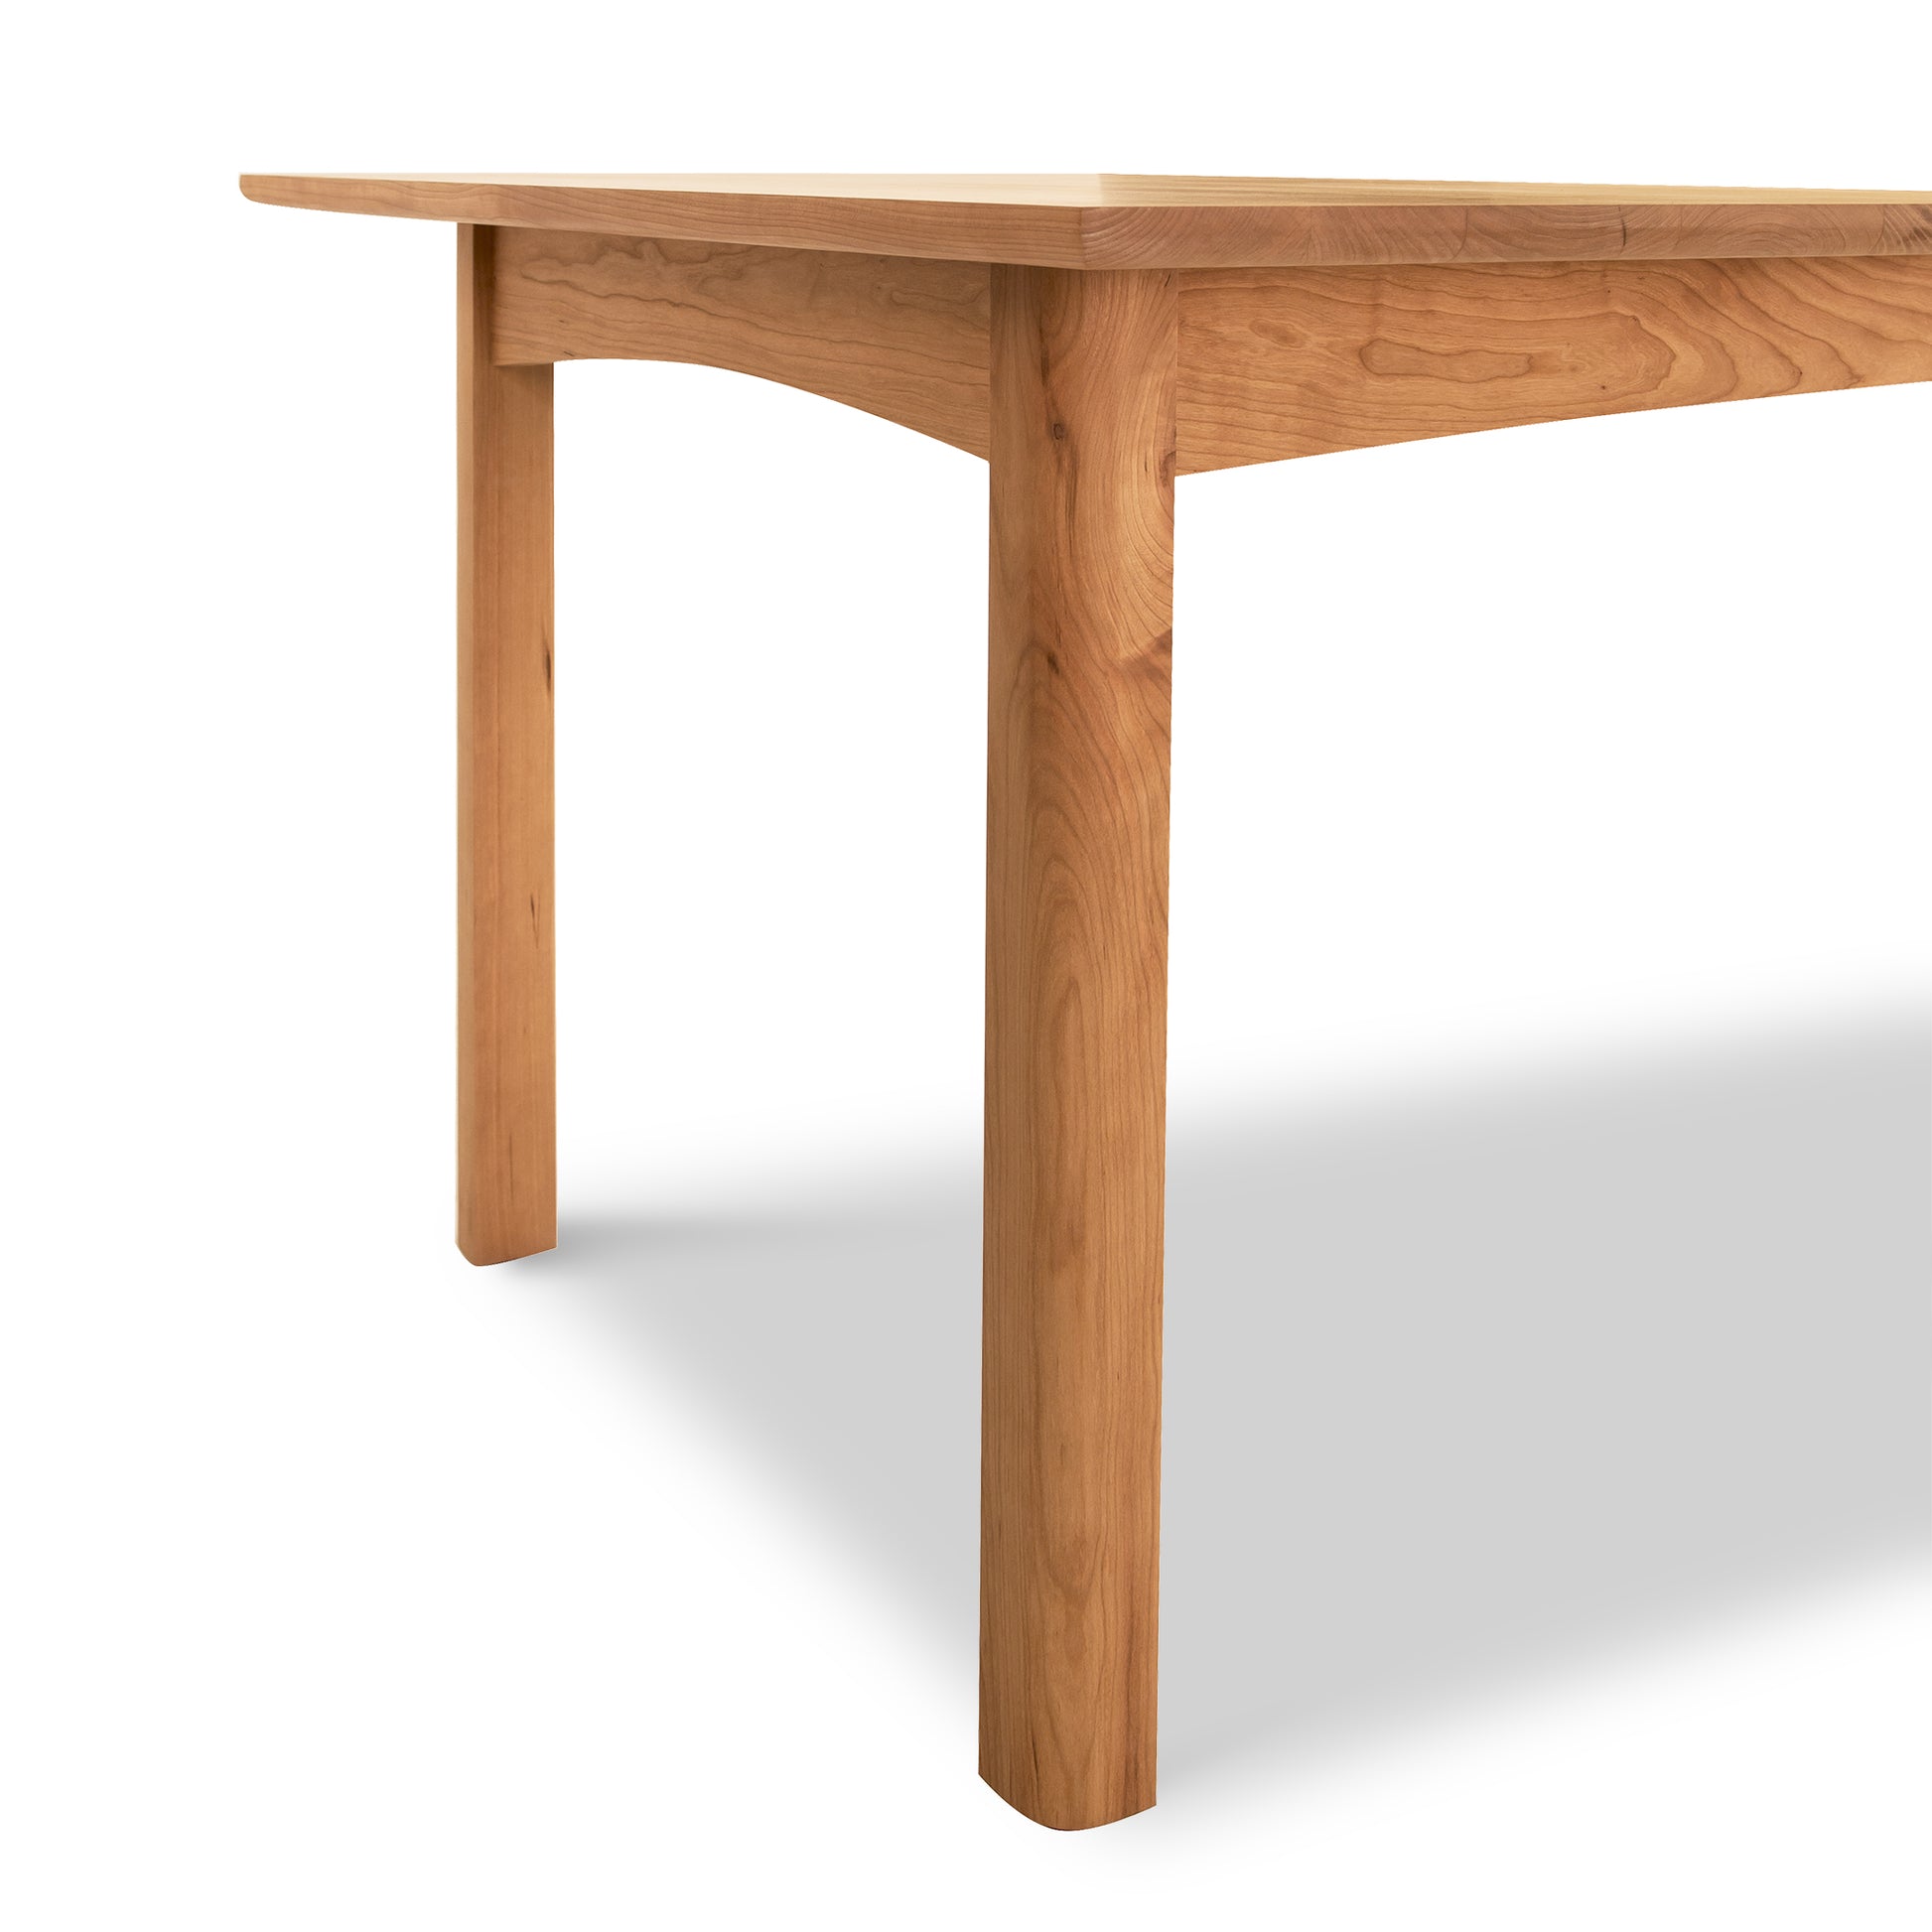 A wooden table with a simple design, featuring one visible leg and a top with a clear wood grain pattern, against an off-white background. This is the Vermont Furniture Designs Heartwood Shaker Extension Dining Table.